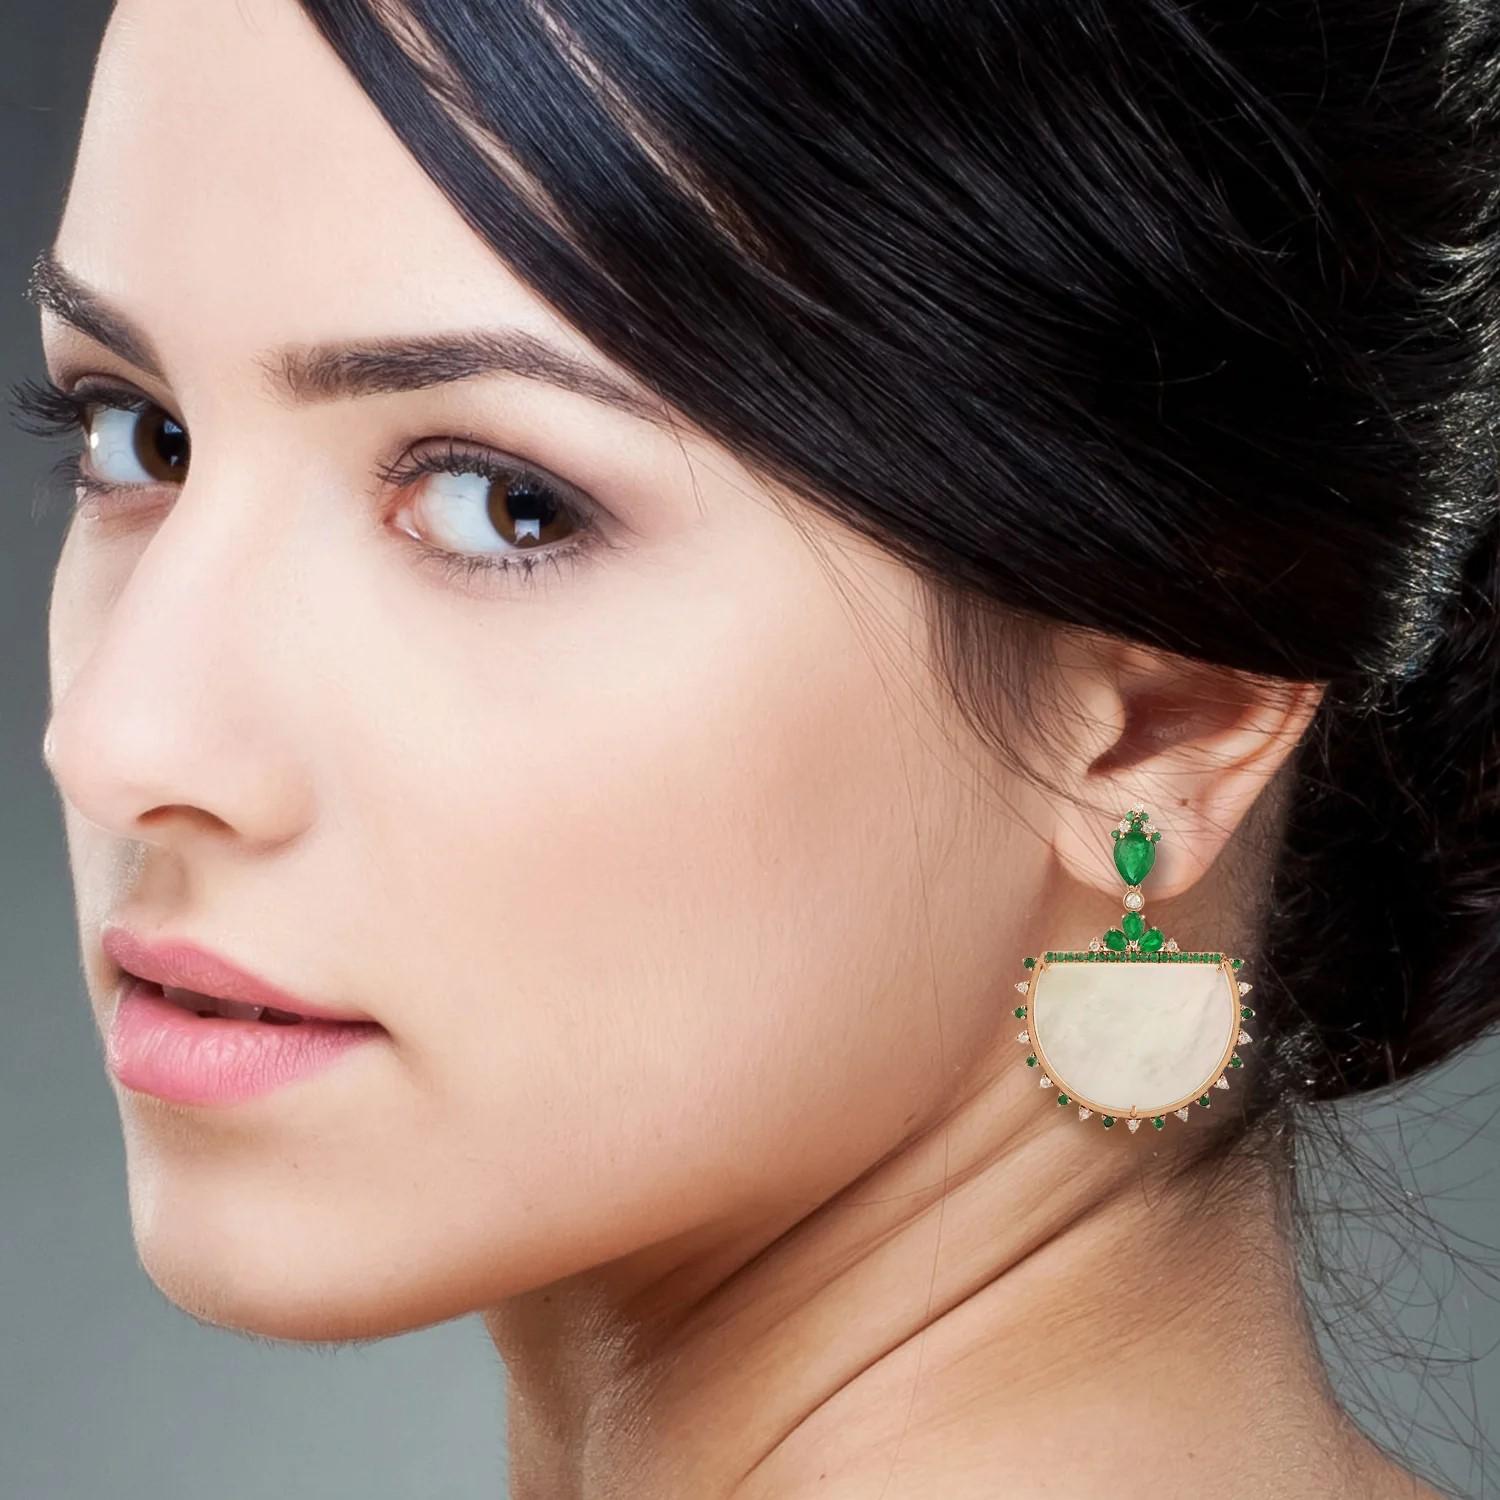 Cast from 14-karat gold, these stunning earrings are hand set with 3.67 carats Emerald, 23.12 carats mother of pearl and .54 carats of glimmering diamonds. 

FOLLOW  MEGHNA JEWELS storefront to view the latest collection & exclusive pieces.  Meghna